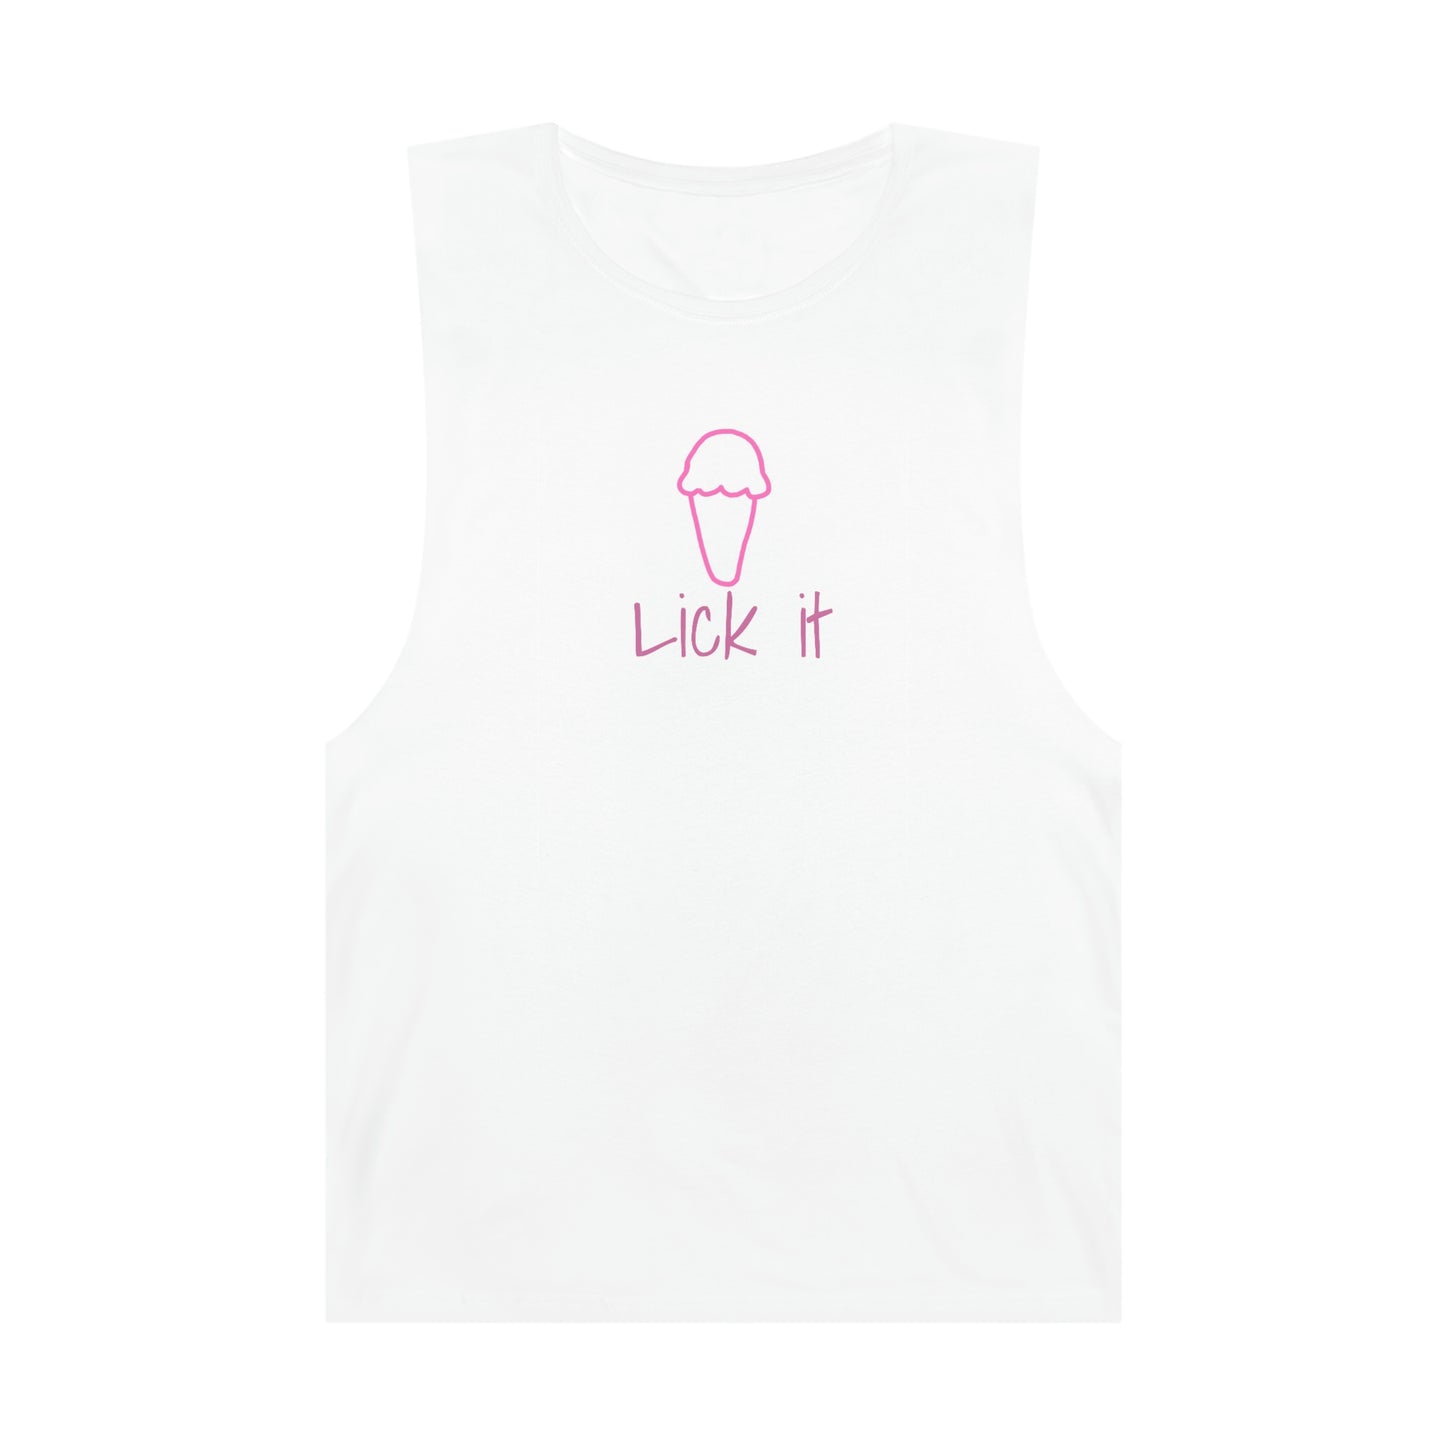 'Lick it' from the Ice Cream and Lollic*cks Collection Unisex Tank